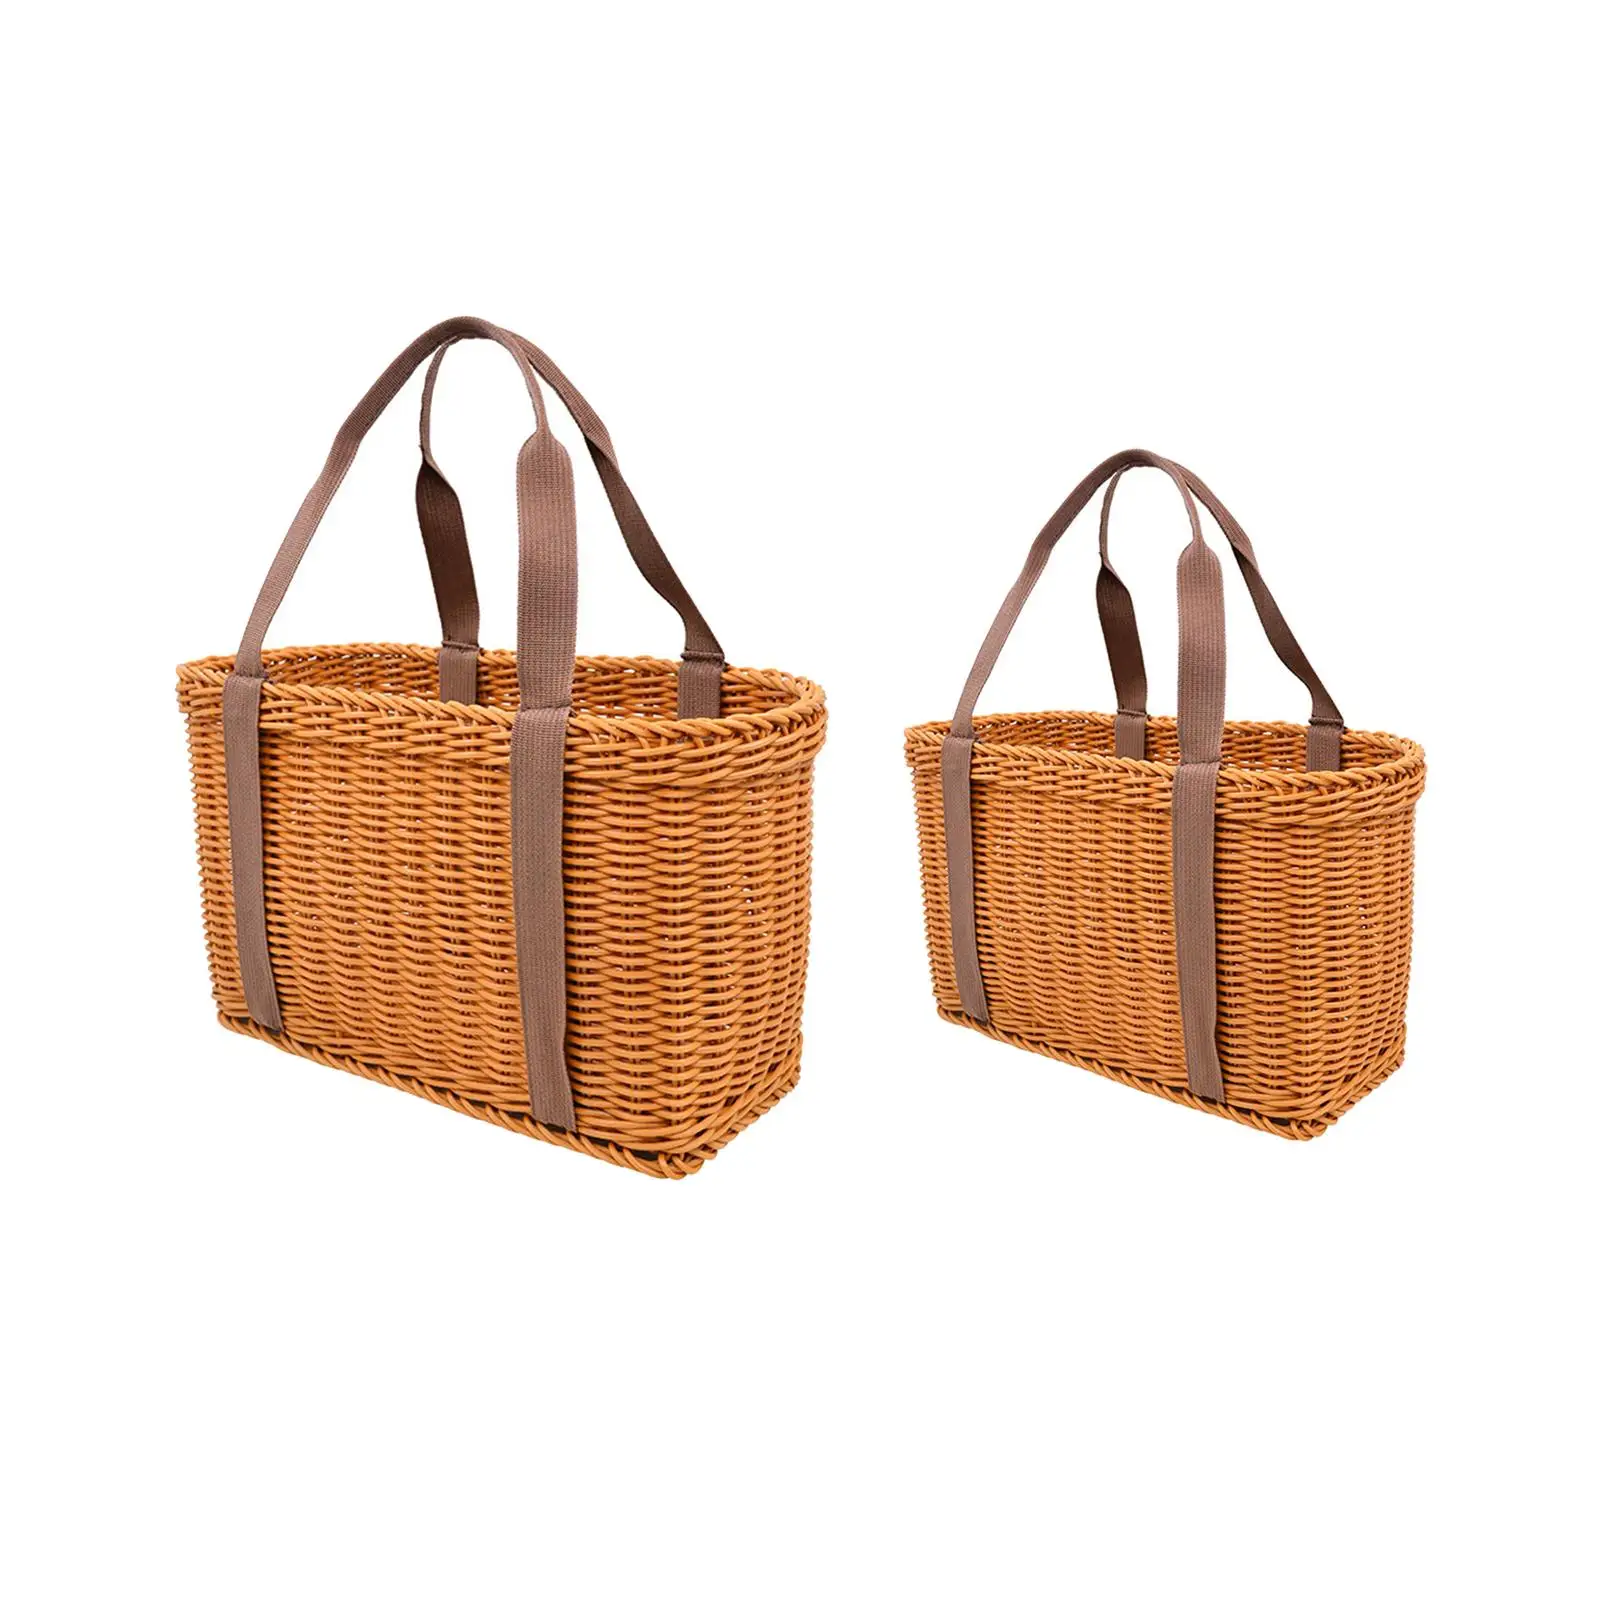 Woven Basket Storage Serving Basket Multipurpose Reusable Container Woven Grocery Bag Picnic Hamper for Beach Kitchen